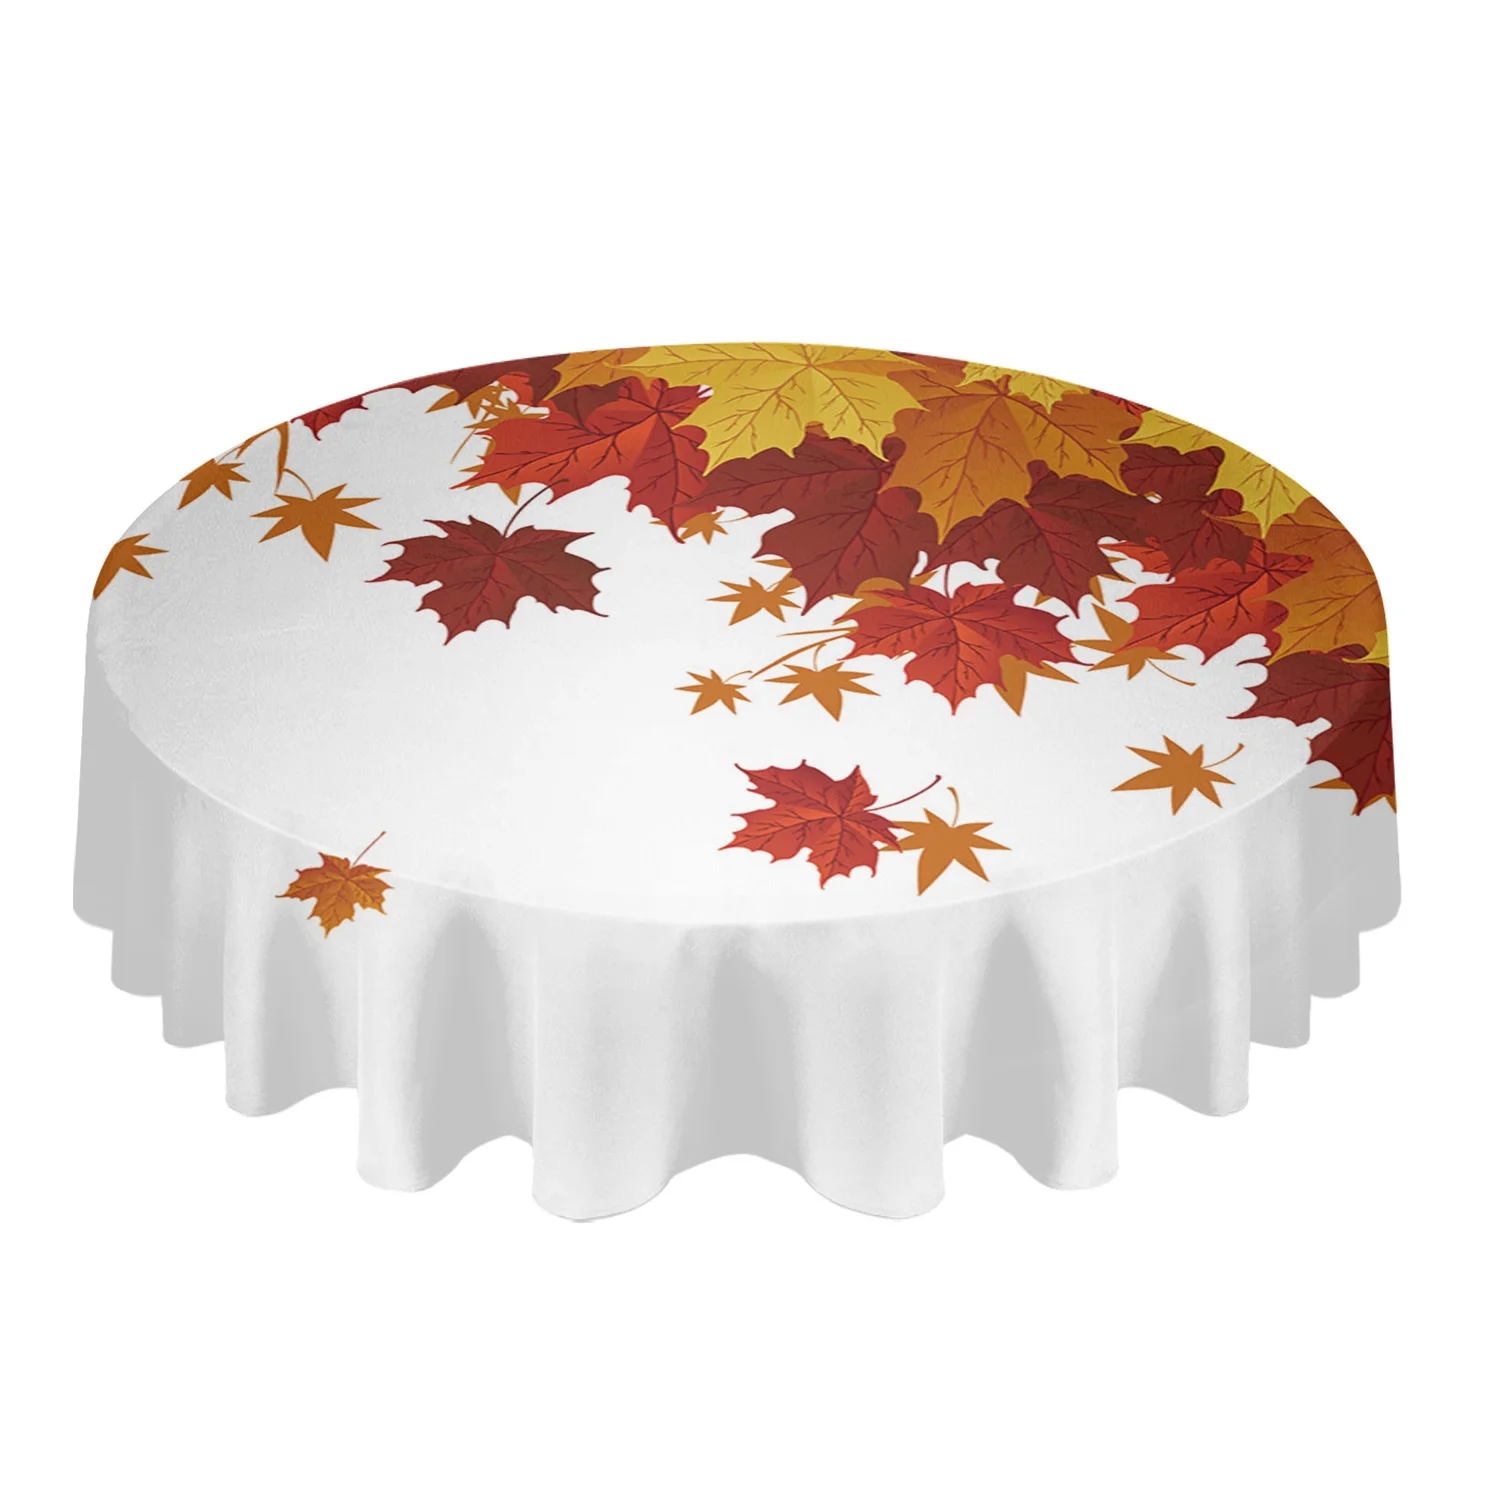 

Autumn Maple Leaves Gradient Round Tablecloth Kitchen Decor Waterproof Table Cloth Dining Coffee Table Cover Picnic Mat